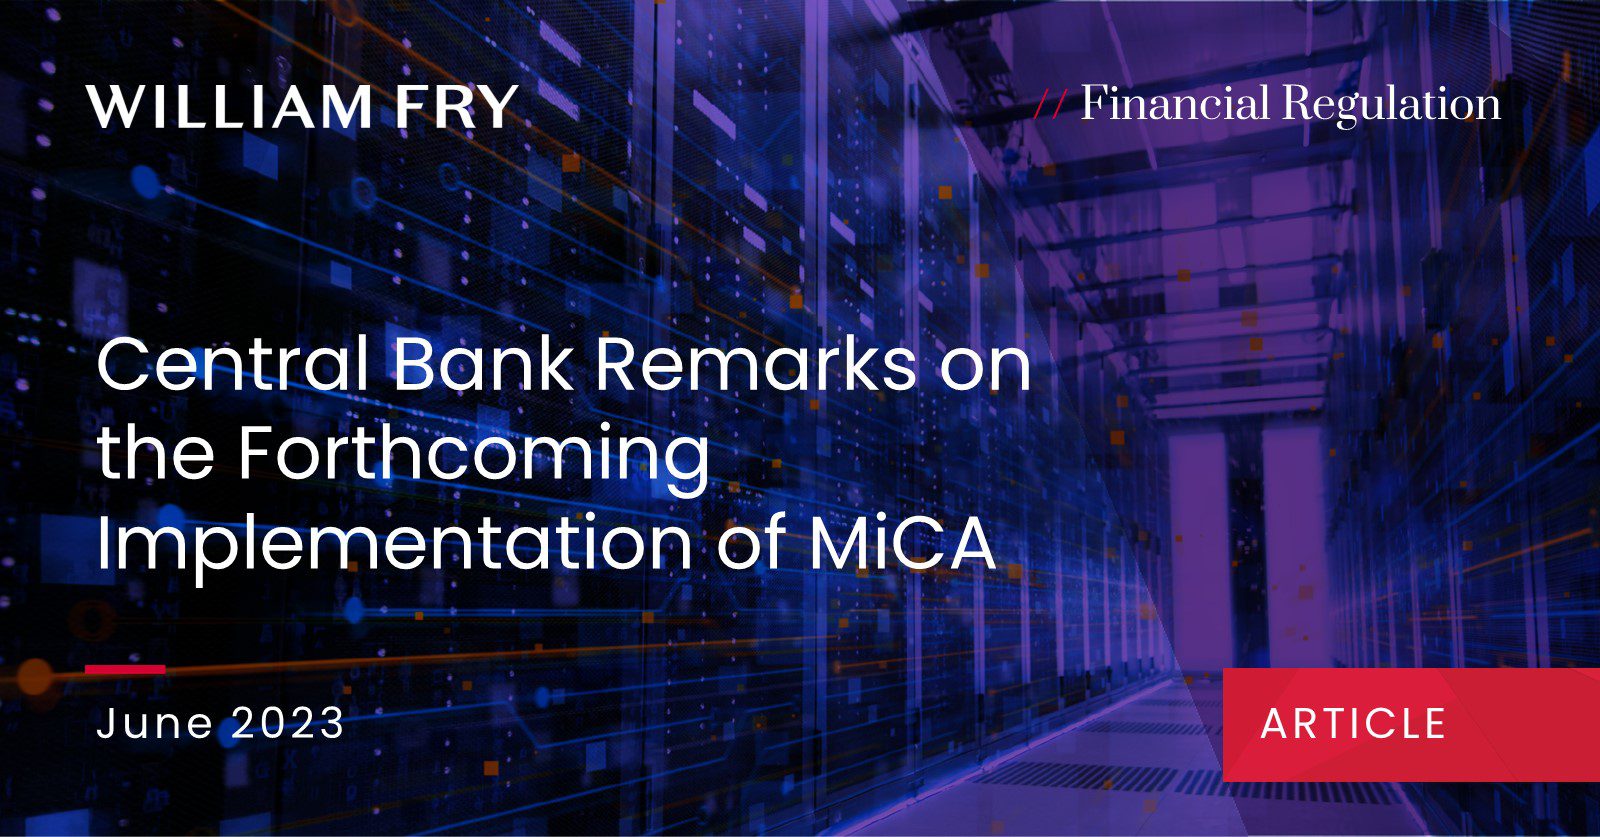 Central Bank Remarks on the Forthcoming Implementation of MiCA